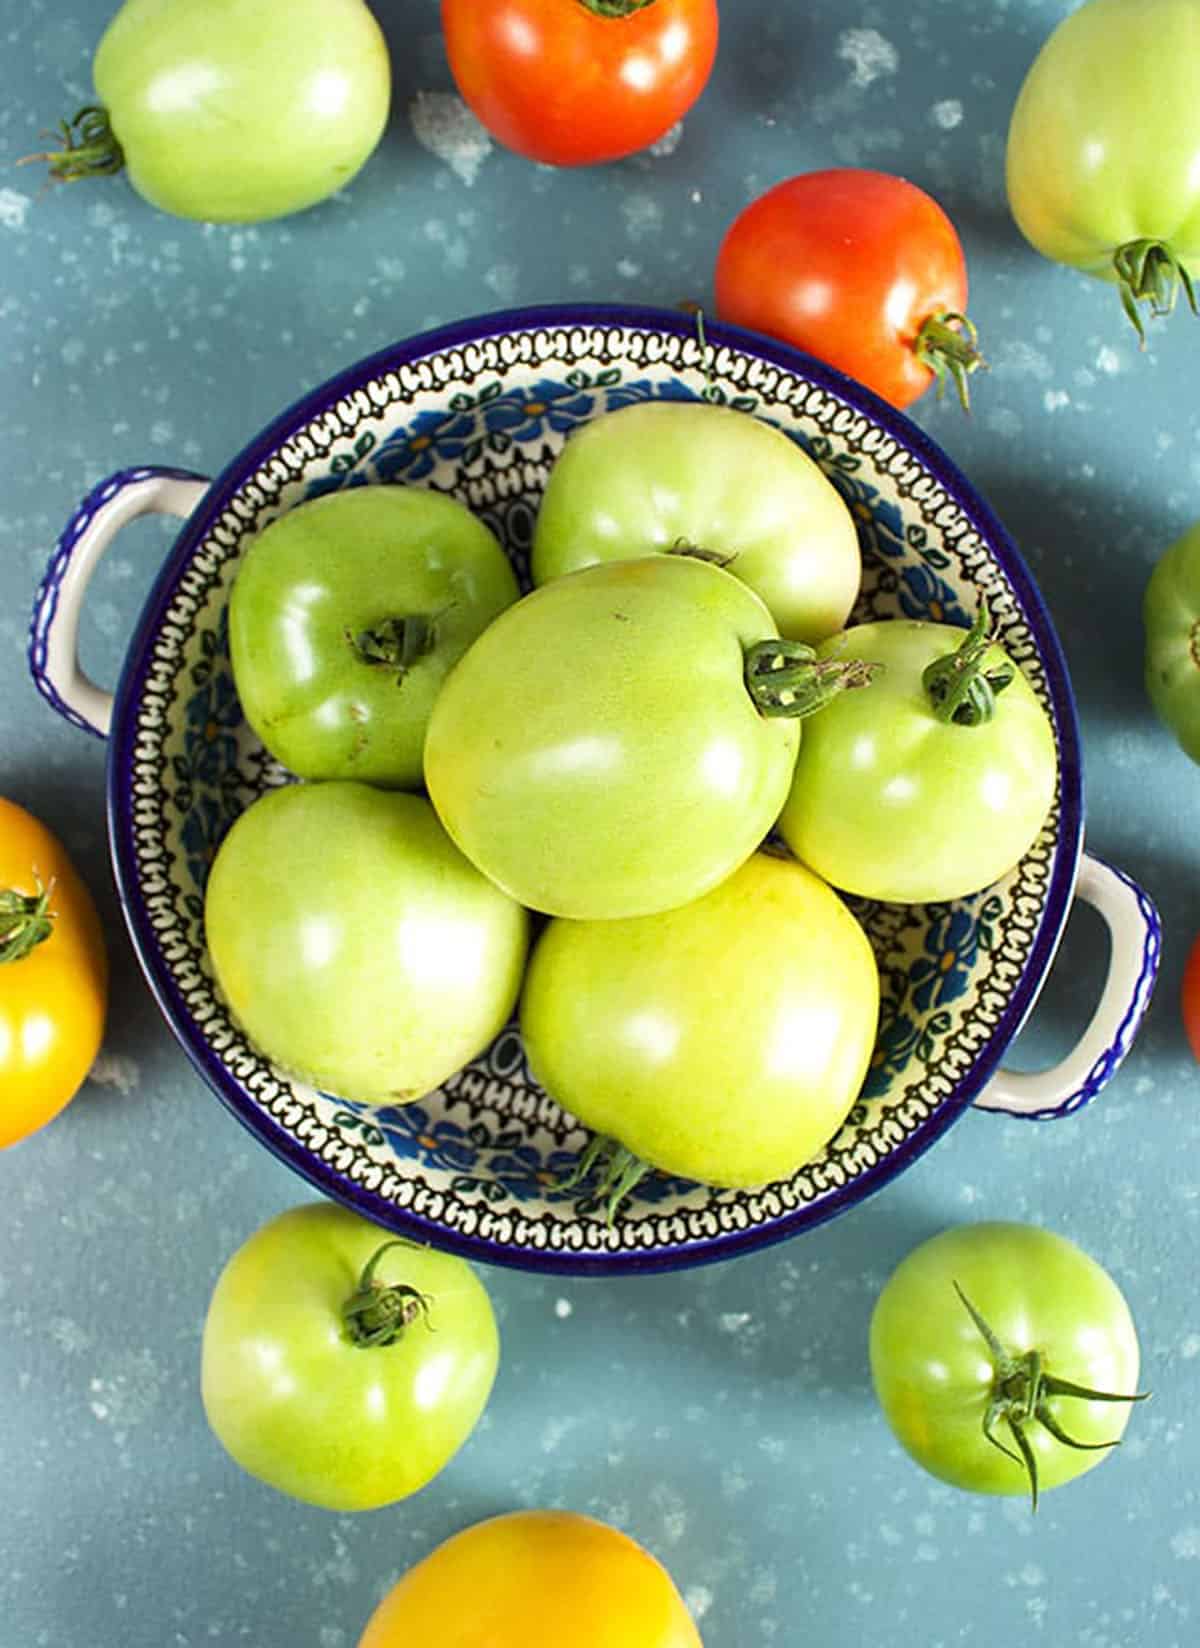 A bowl of green tomatoes on a blue background